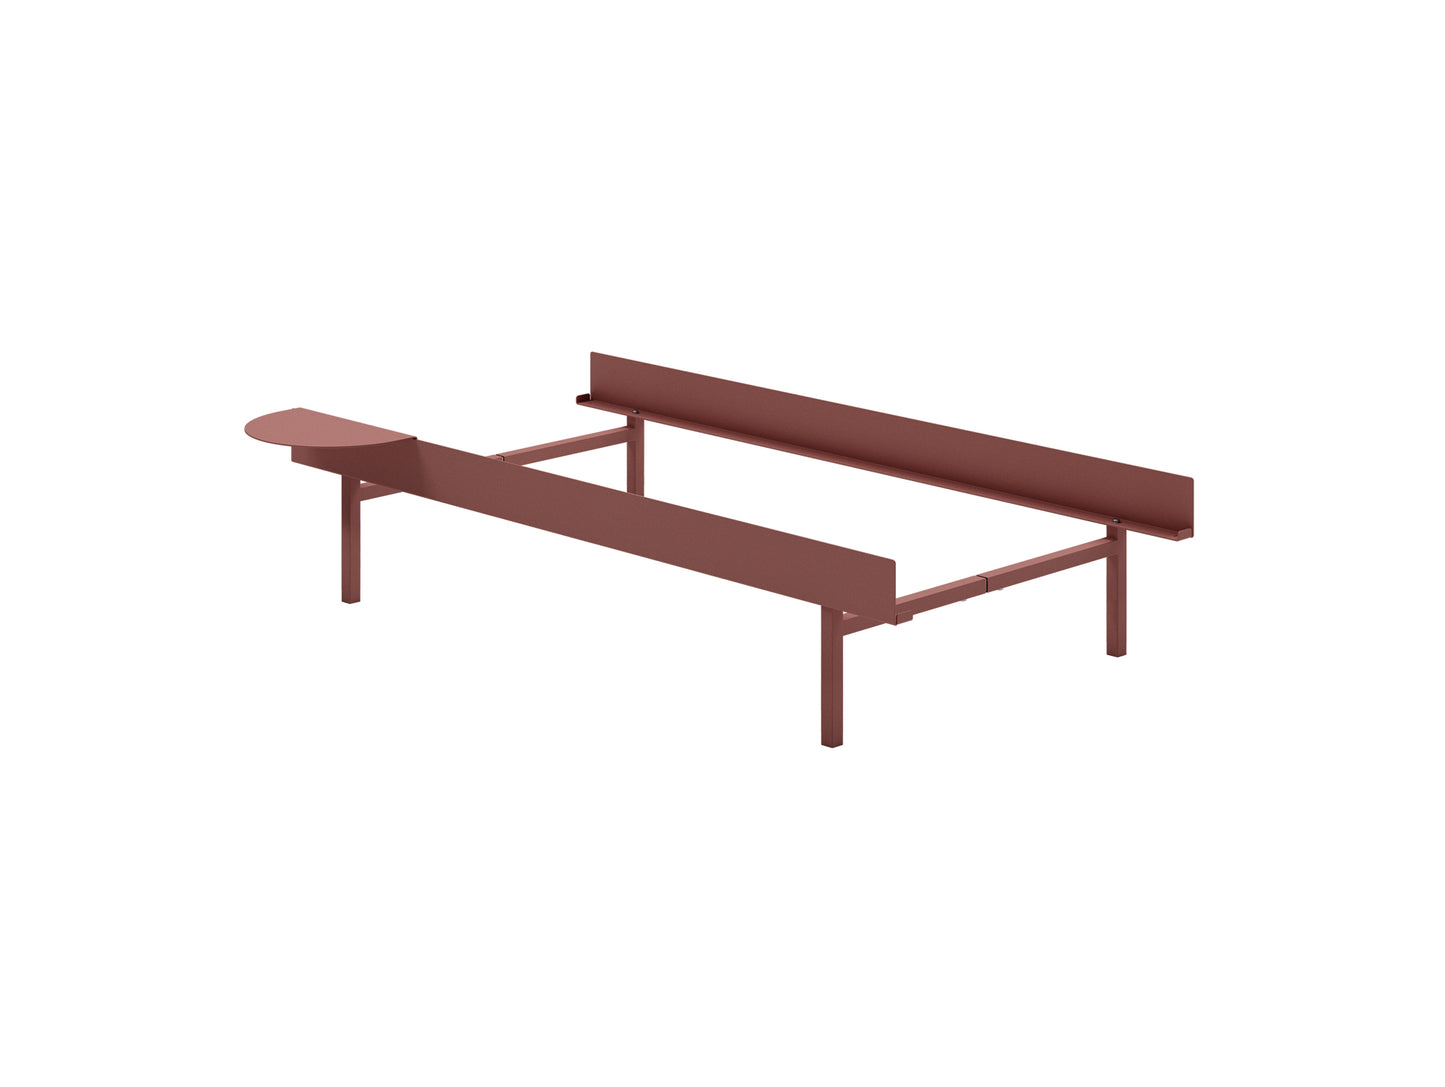 Bed 90 - 180 cm (High) by Moebe- Bed Frame / with NO SLATS / 1 Side Table / Dusty Rose